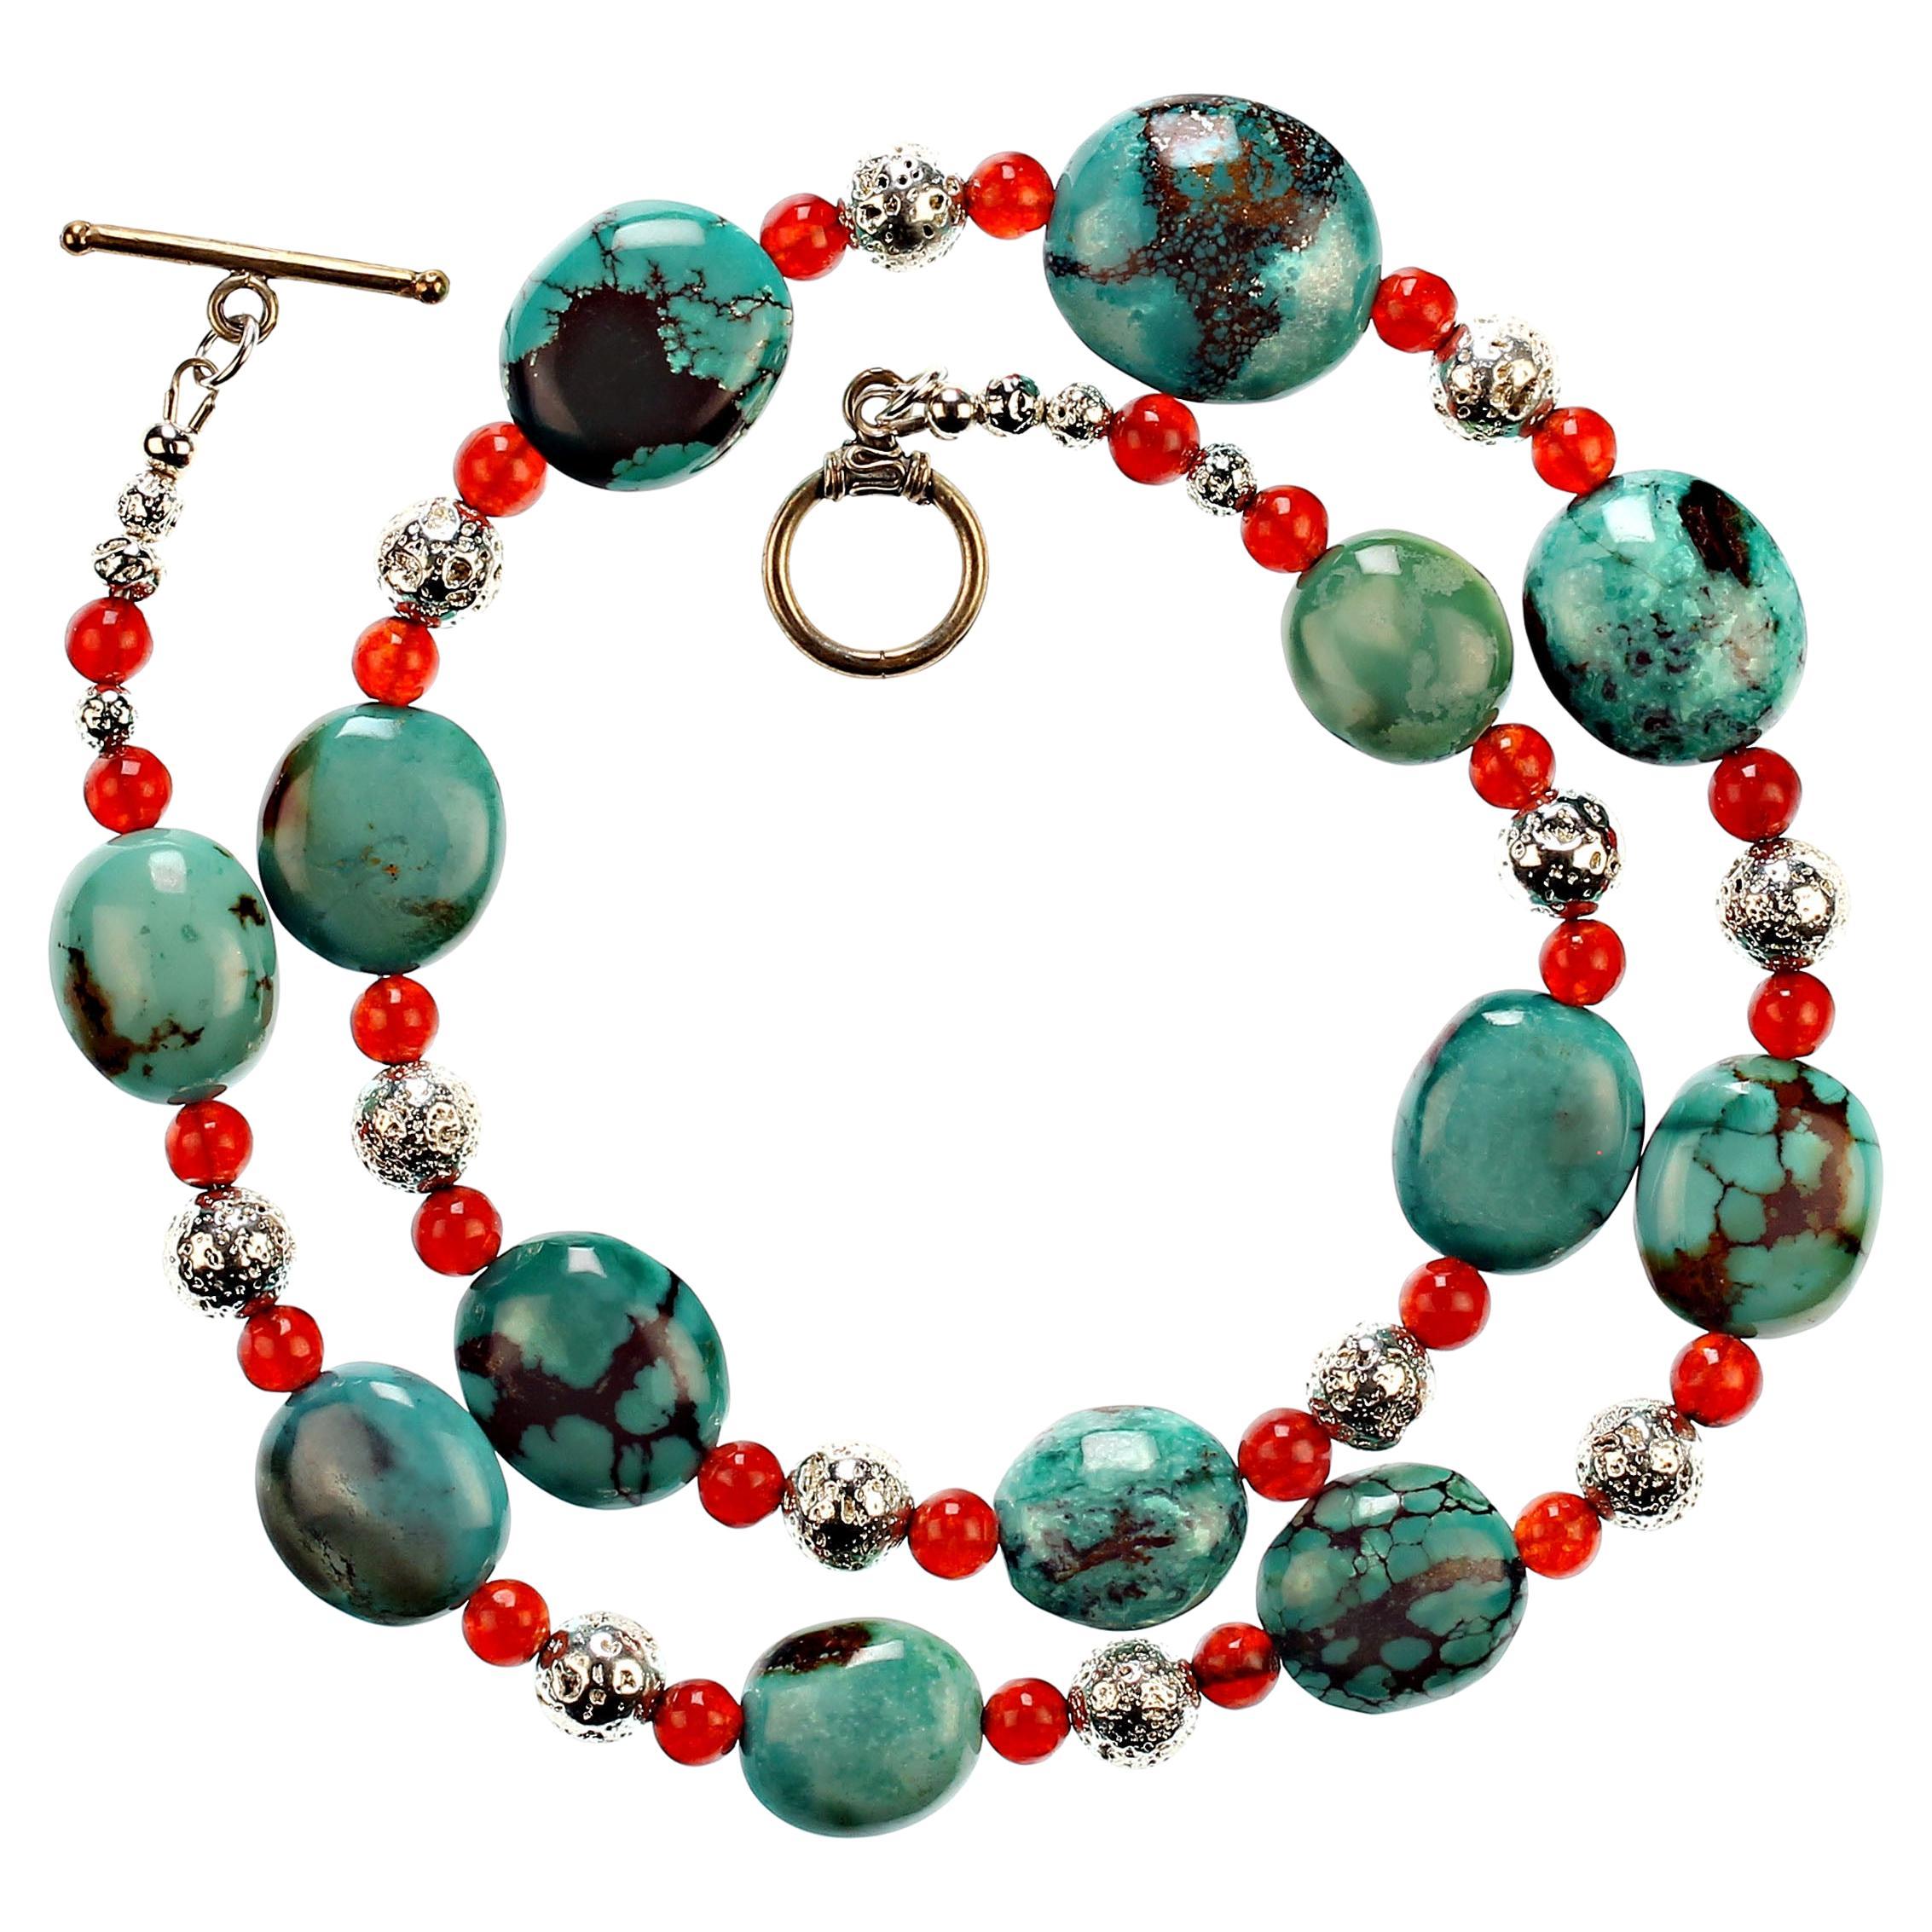 AJD 22 Inch Southwest Influence Necklace of Turquoise, Carnelian, and Silver For Sale